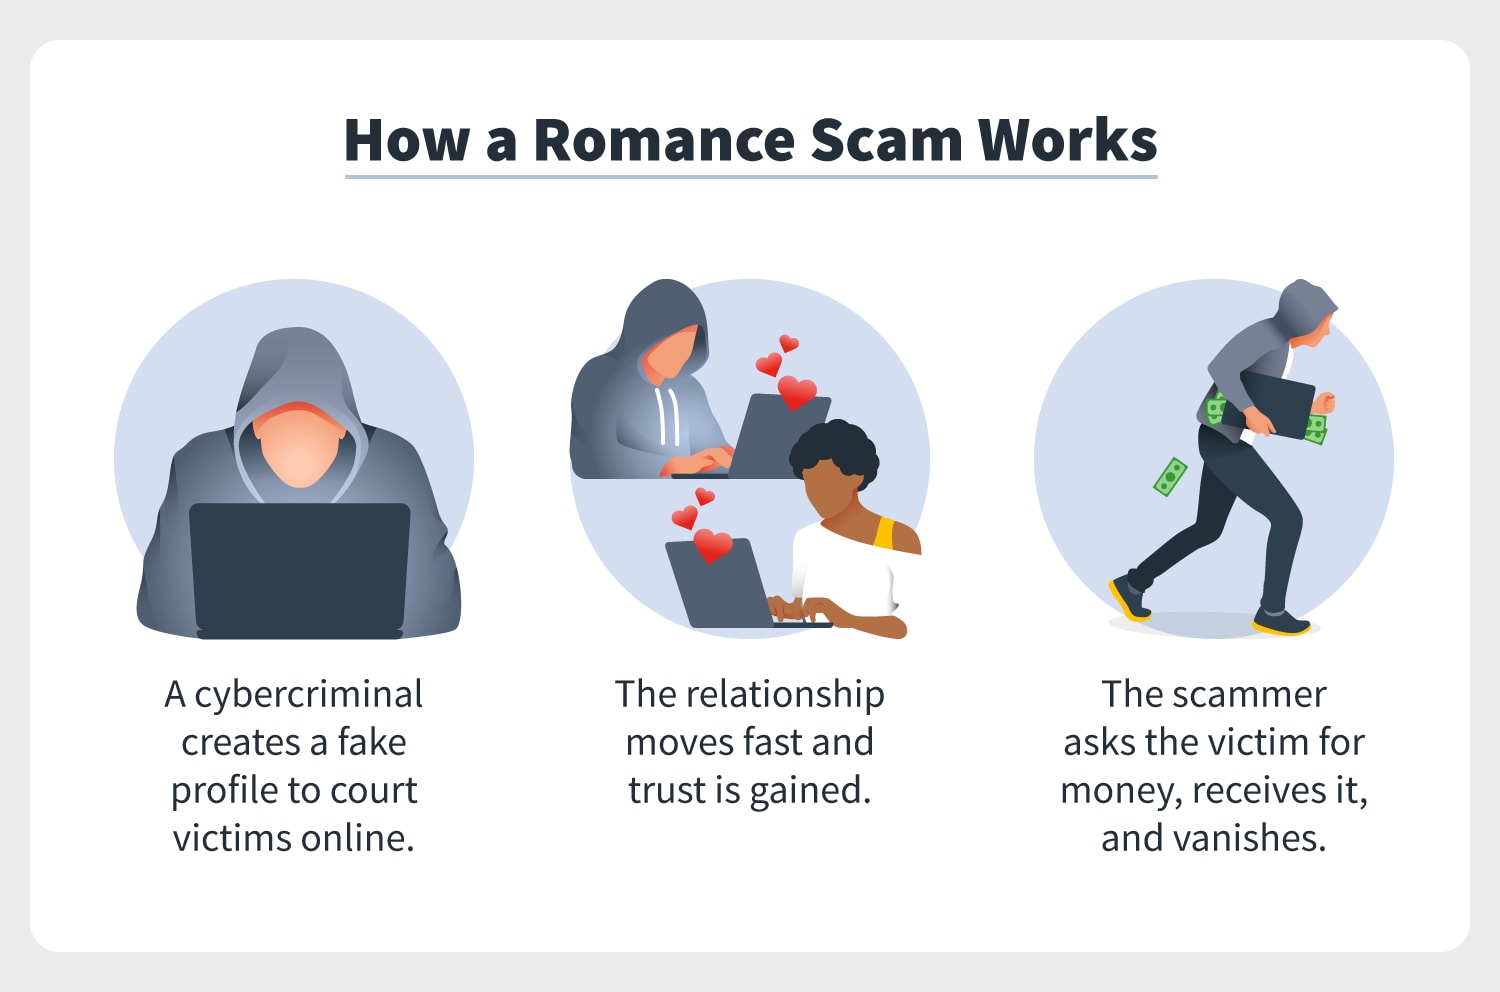 Online Dating Scammers Pose as U.S. Military Personnel